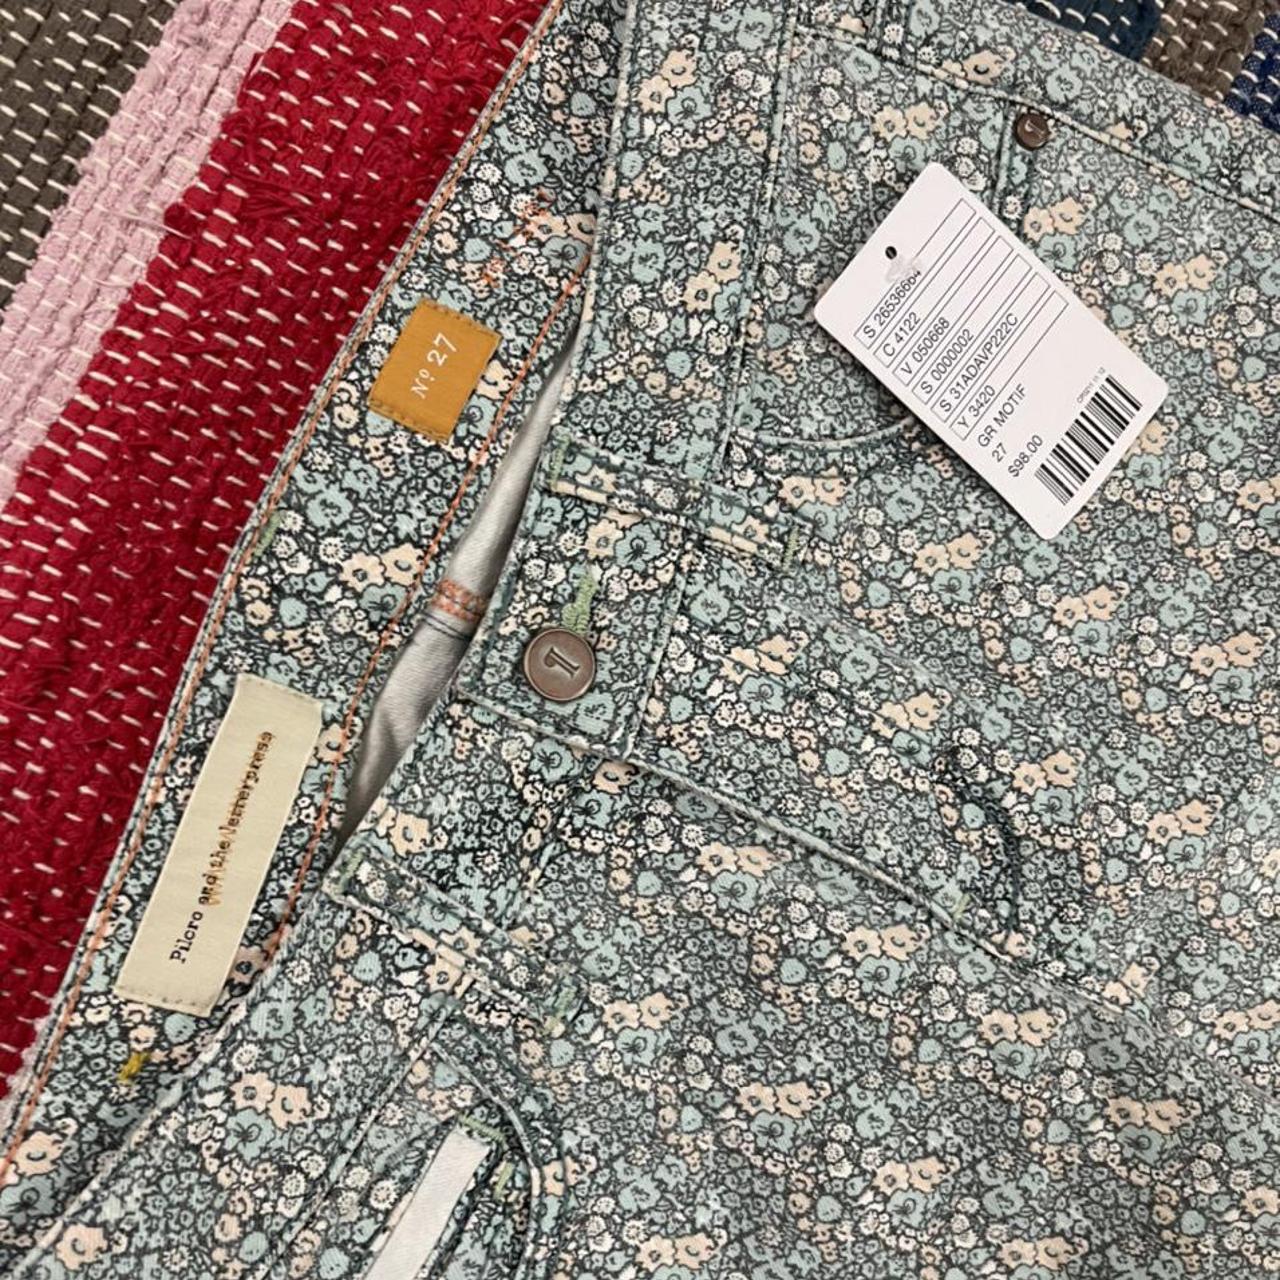 Product Image 3 - DEADSTOCK NWT NEW $98 Anthropologie